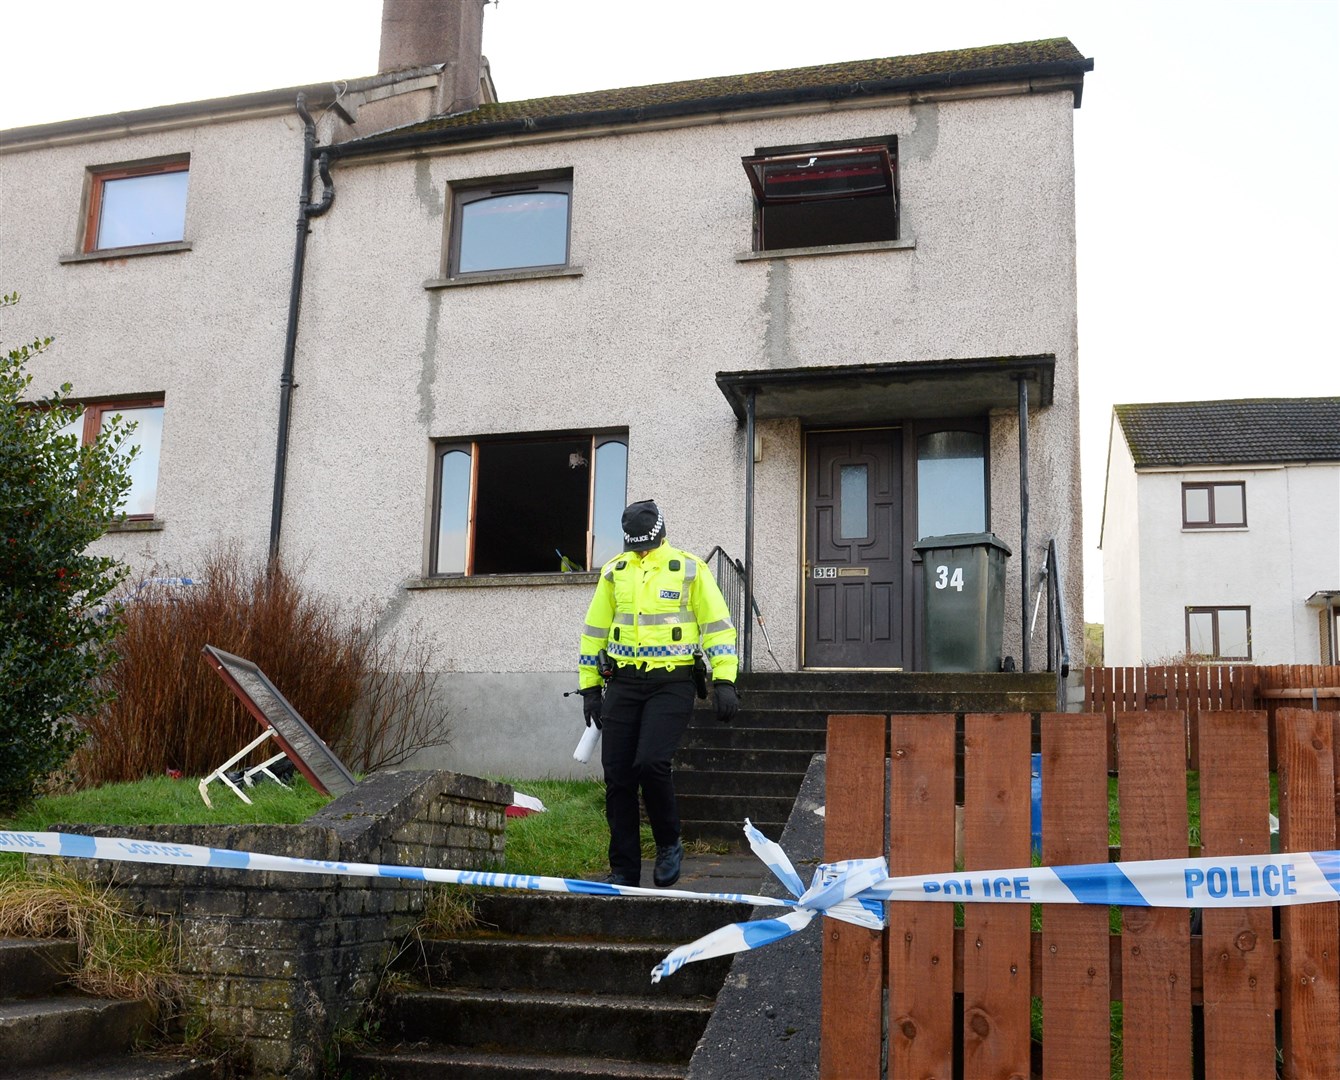 Police in attendance at 34 MacRae Crescent Dingwall after gas explosion in property...Picture: Gary Anthony..